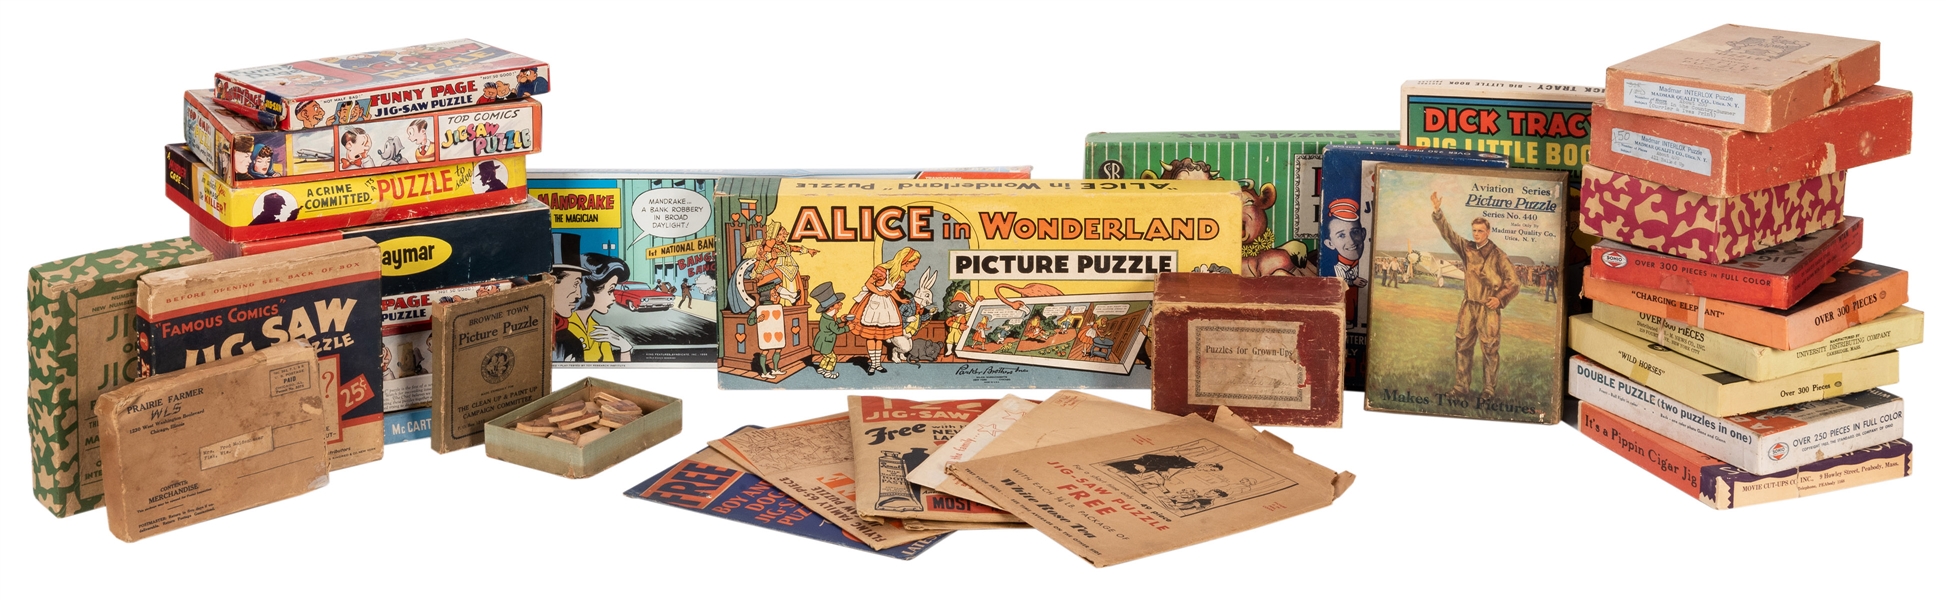  Collection of 72 Vintage Jigsaw Puzzles.  